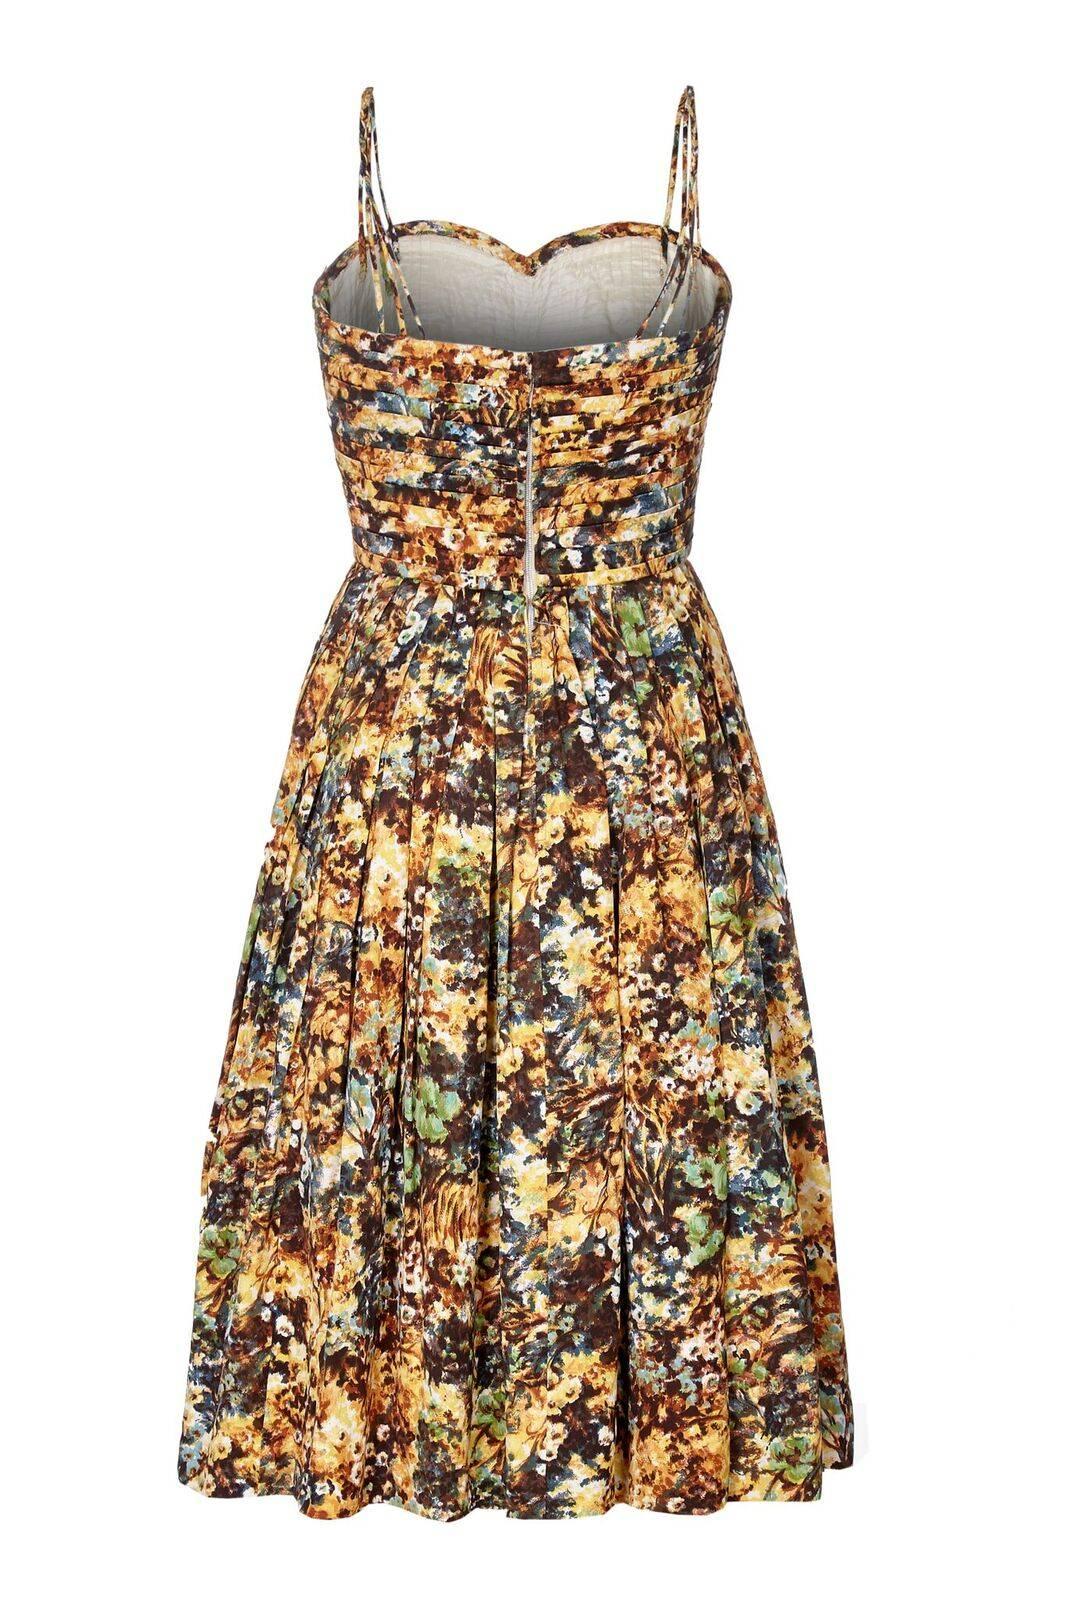 This charming 1950s printed couture dress is beautifully constructed with some exquisite features. The overlay fabric is a silky/cotton blend and printed with an unusual floral design in ochre, rust, chocolate brown and green. The sweetheart